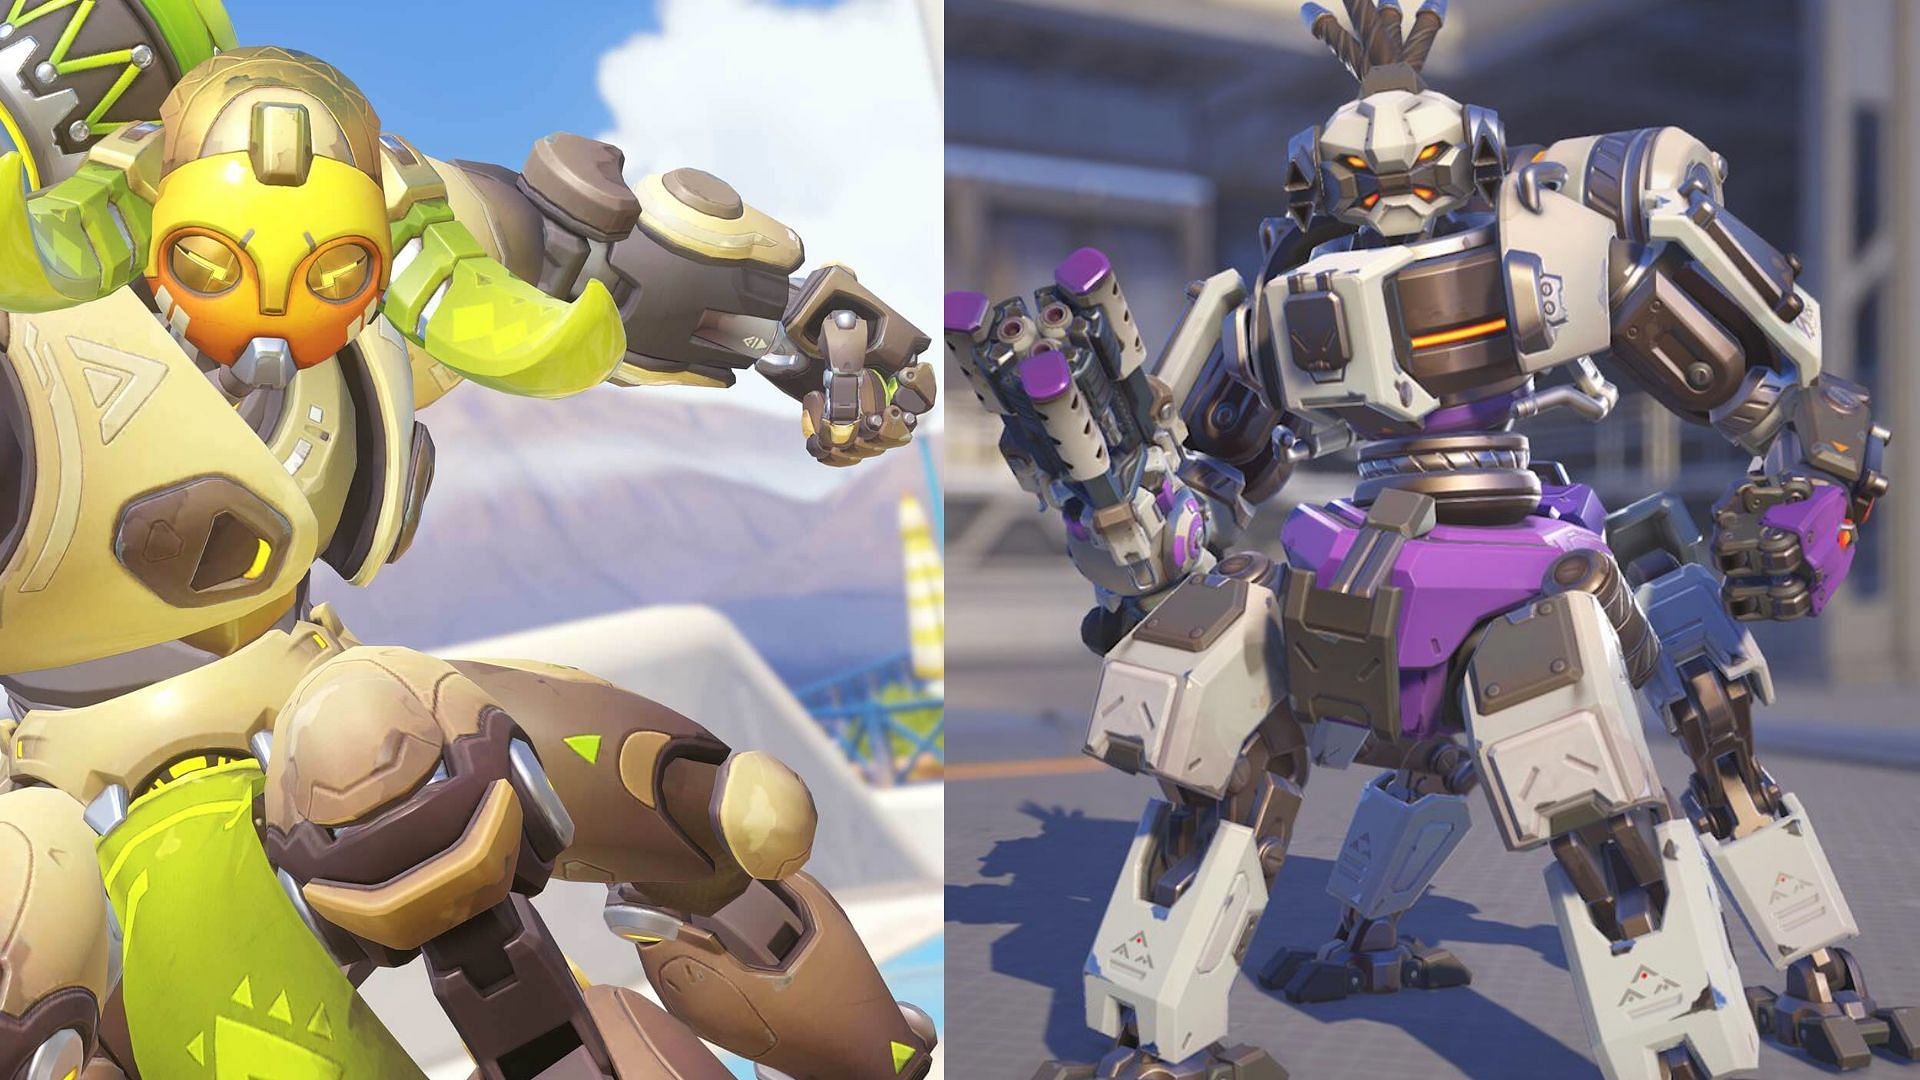 OR Unit Orisa skin for free in Overwatch 2